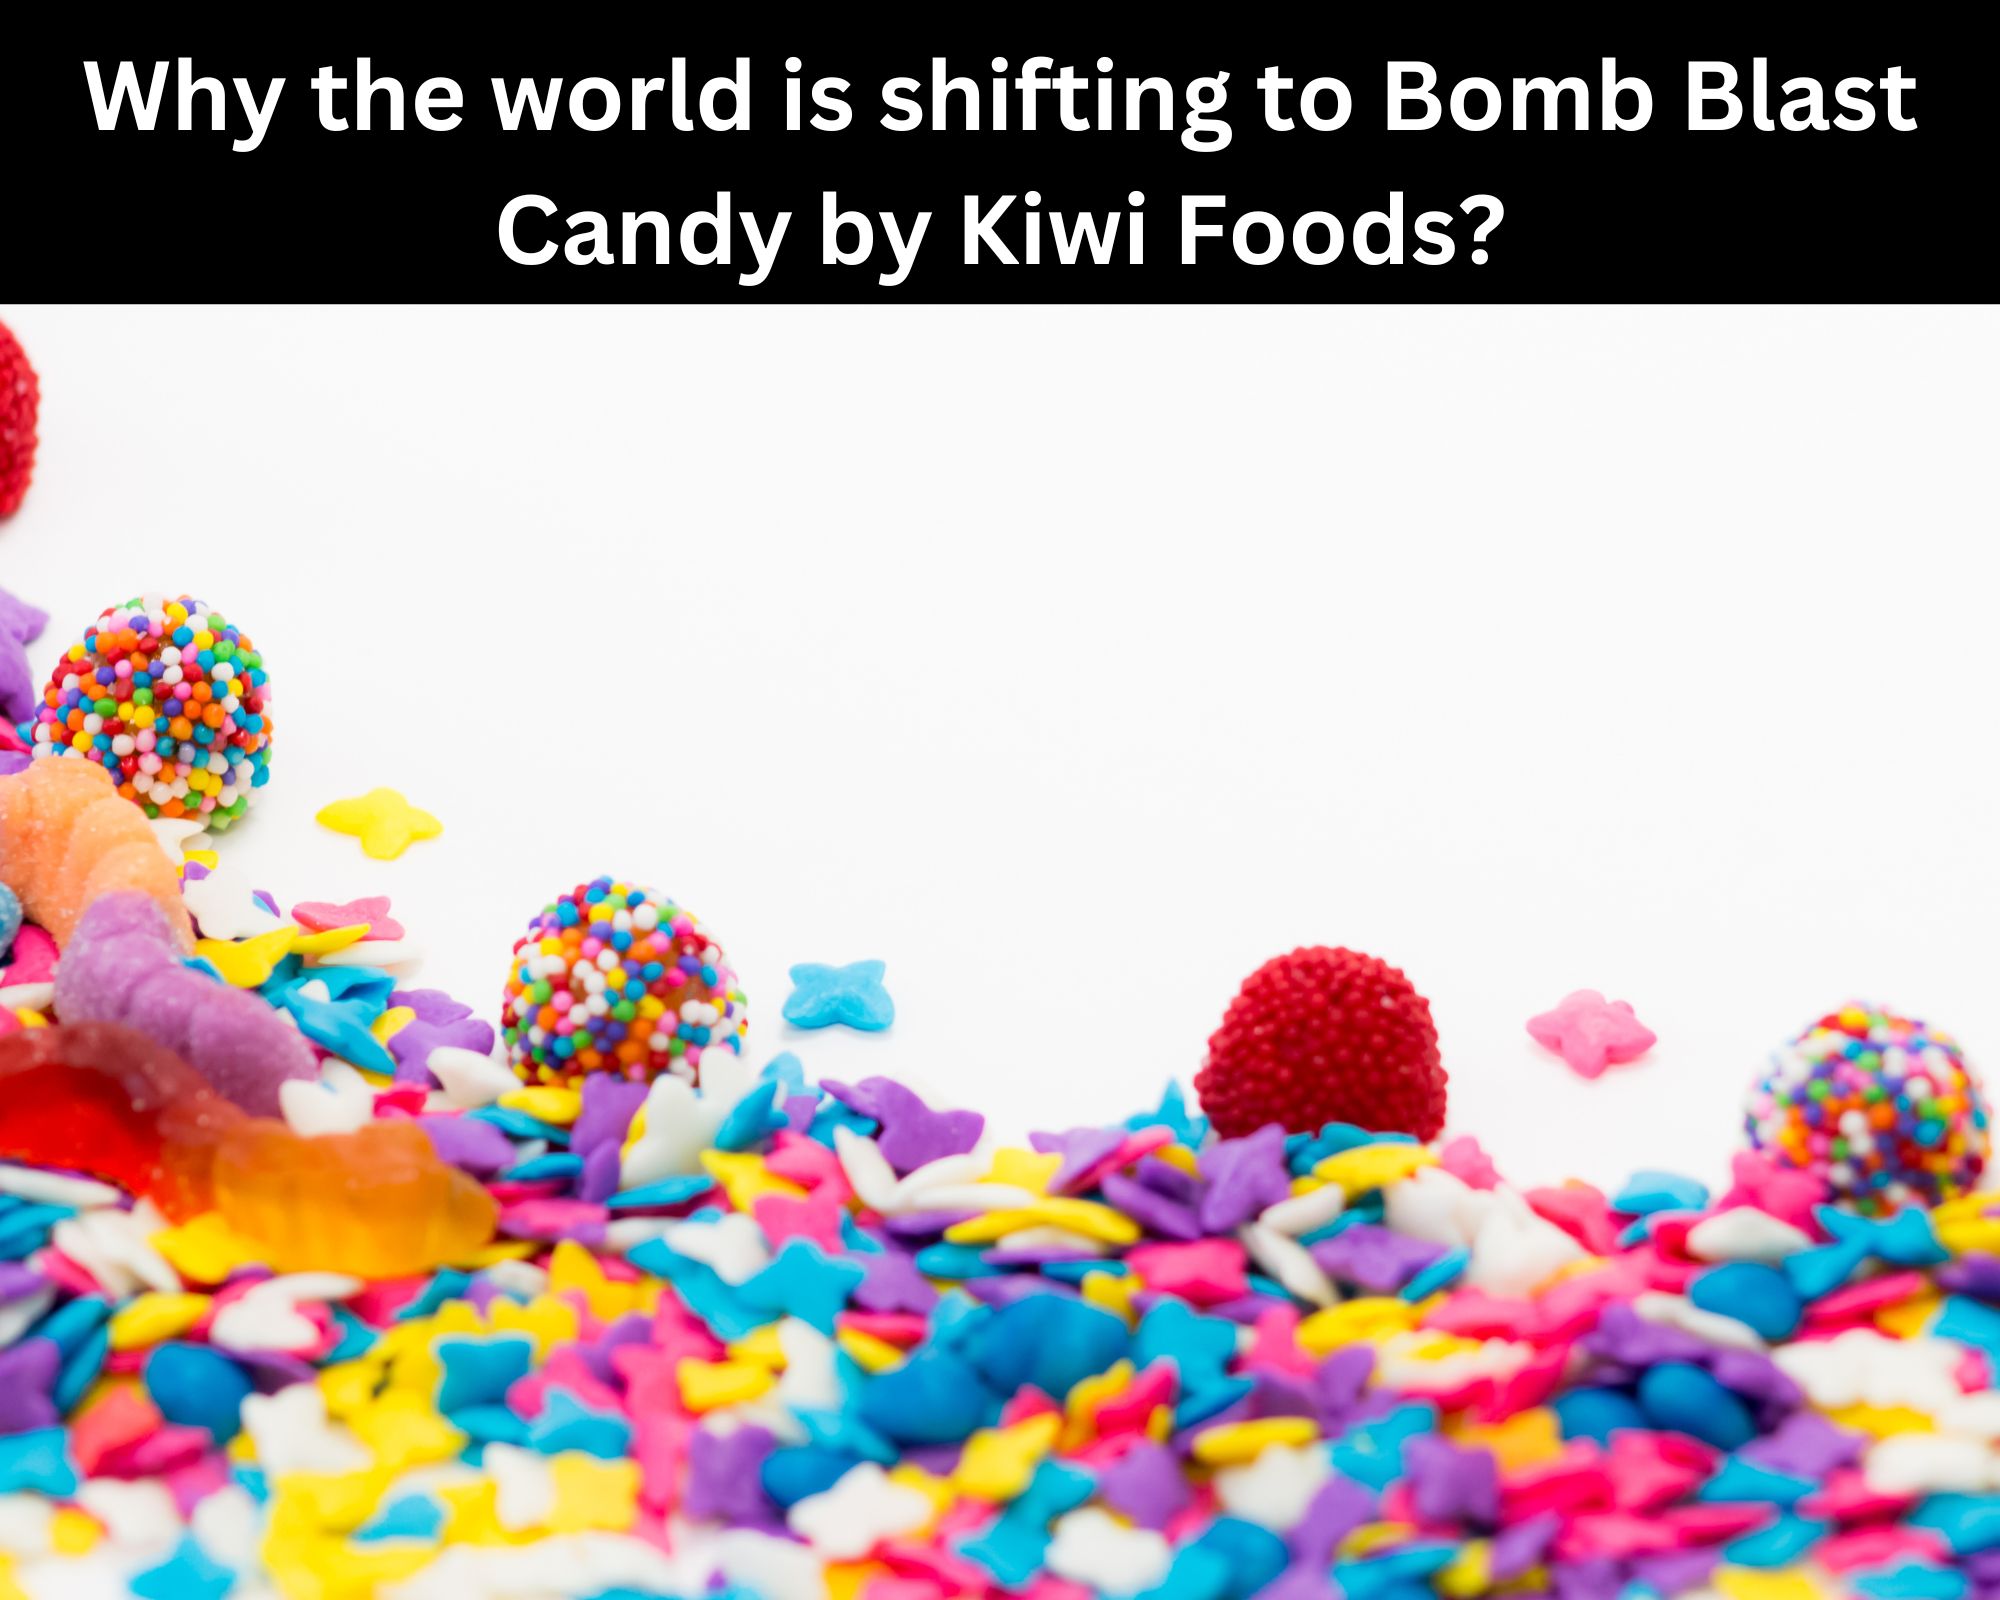 Why the world is shifting to Bomb Blast Candy by Kiwi Foods?